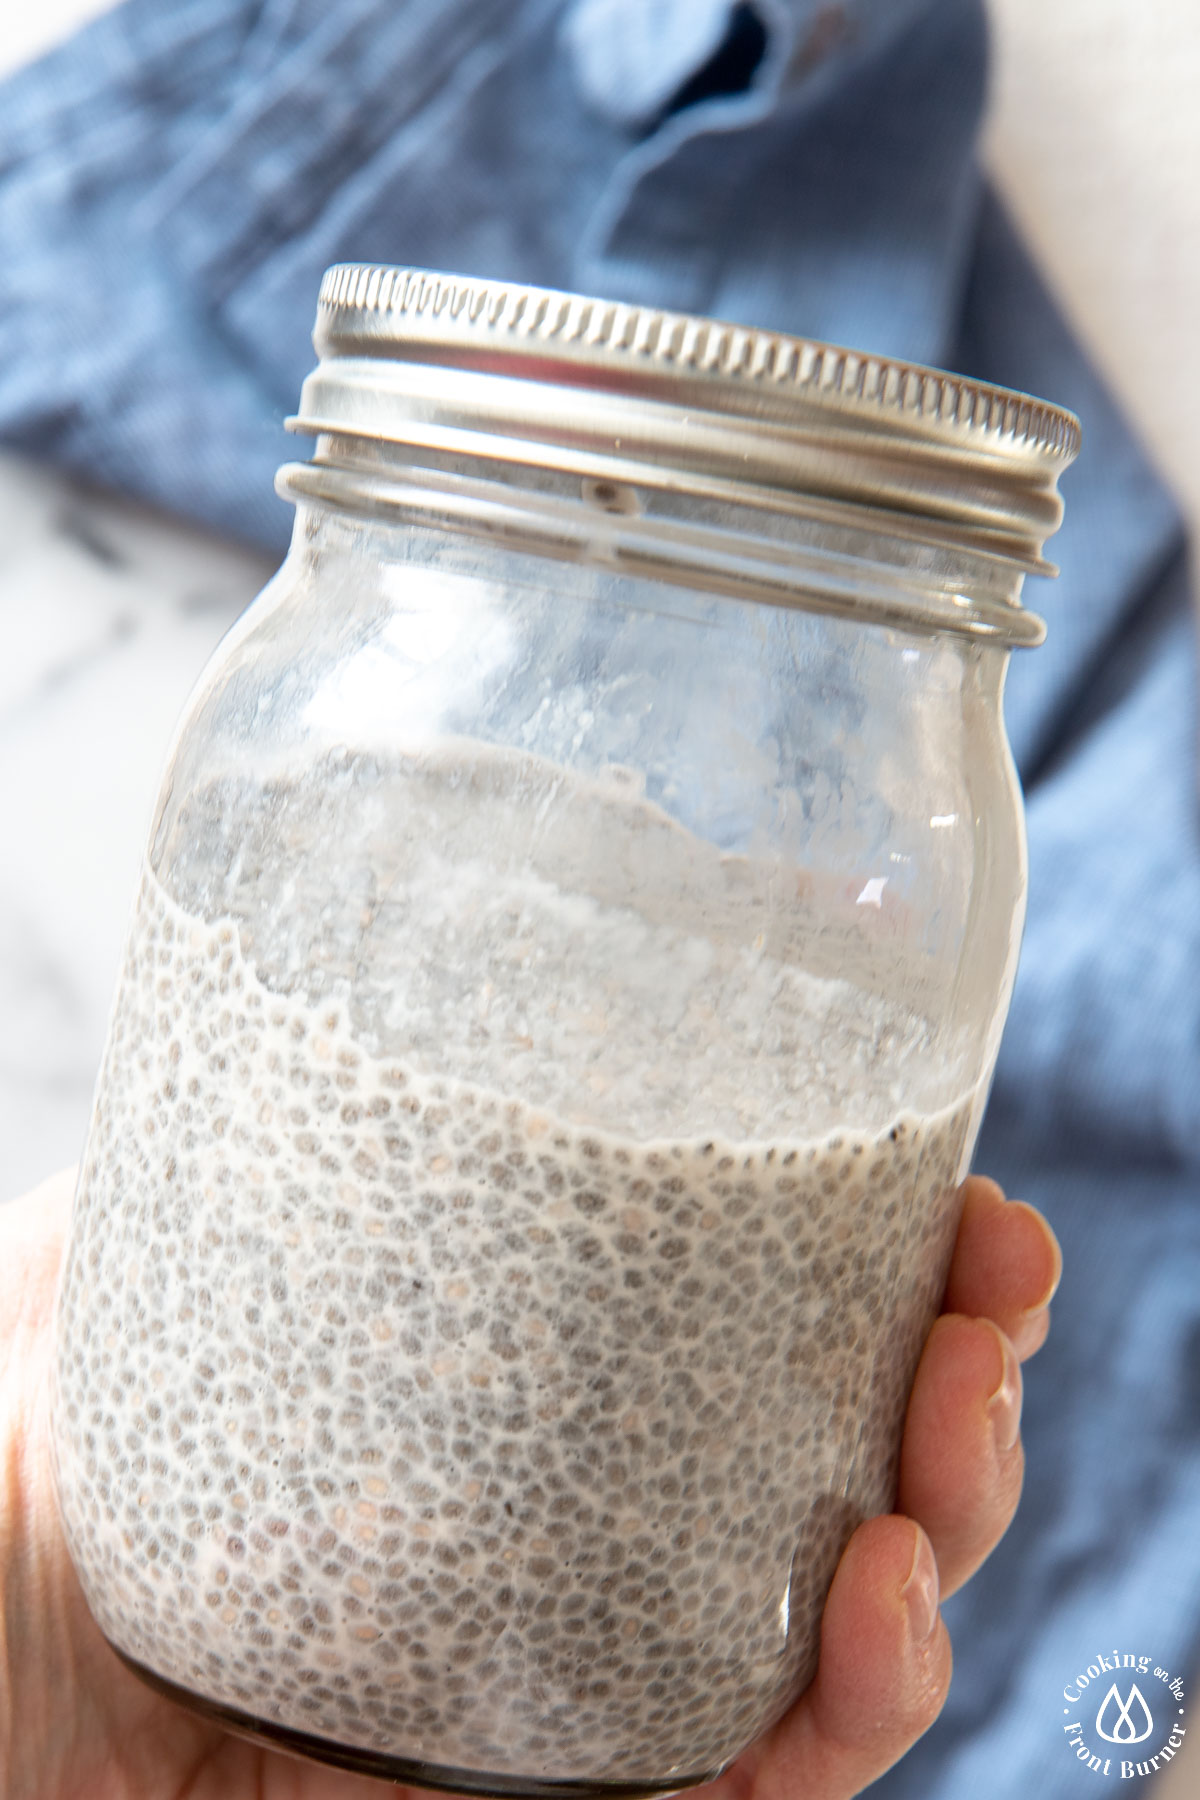 chia pudding in a glass canning jar